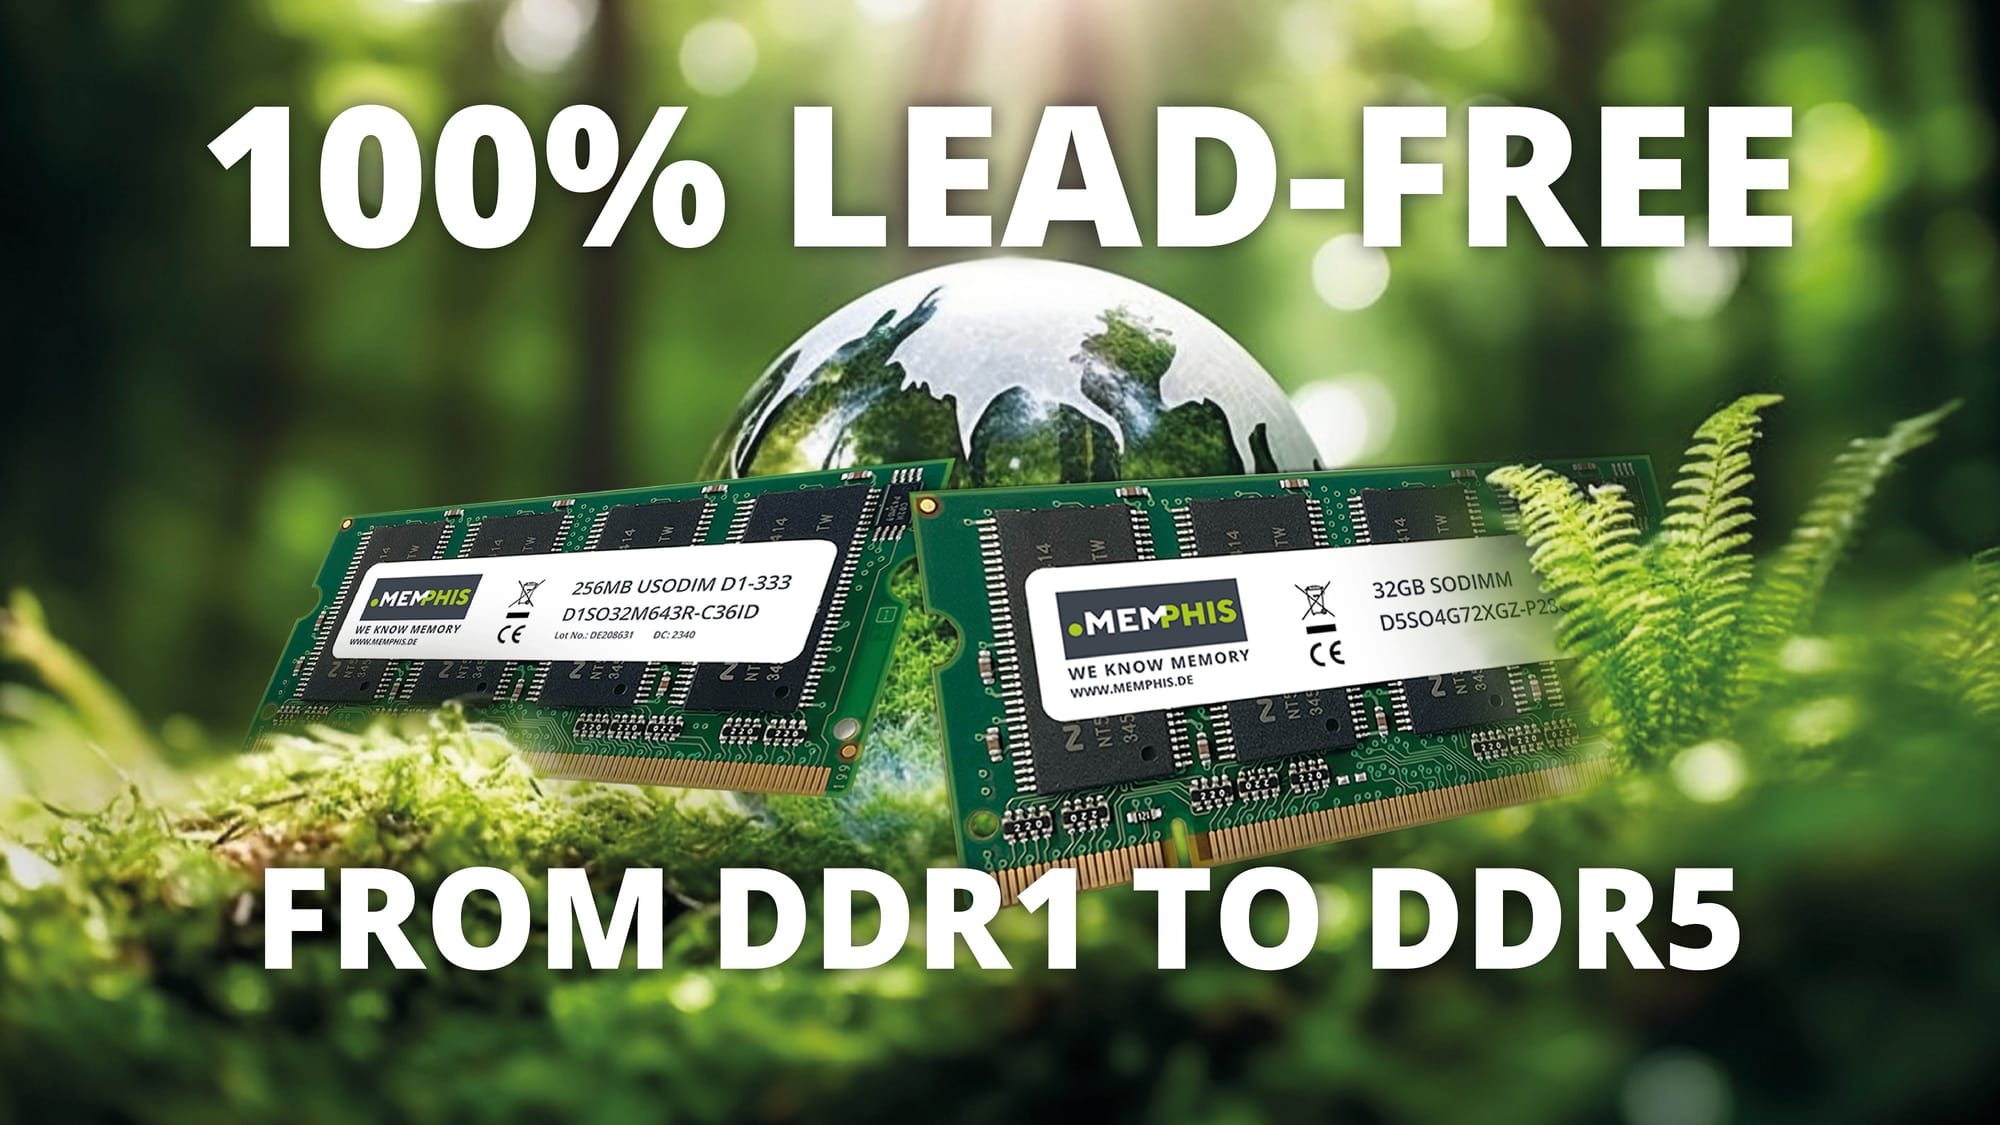 MEMPHIS Electronic presents the industry’s first completely lead-free range of DRAM modules from DDR1 to DDR5